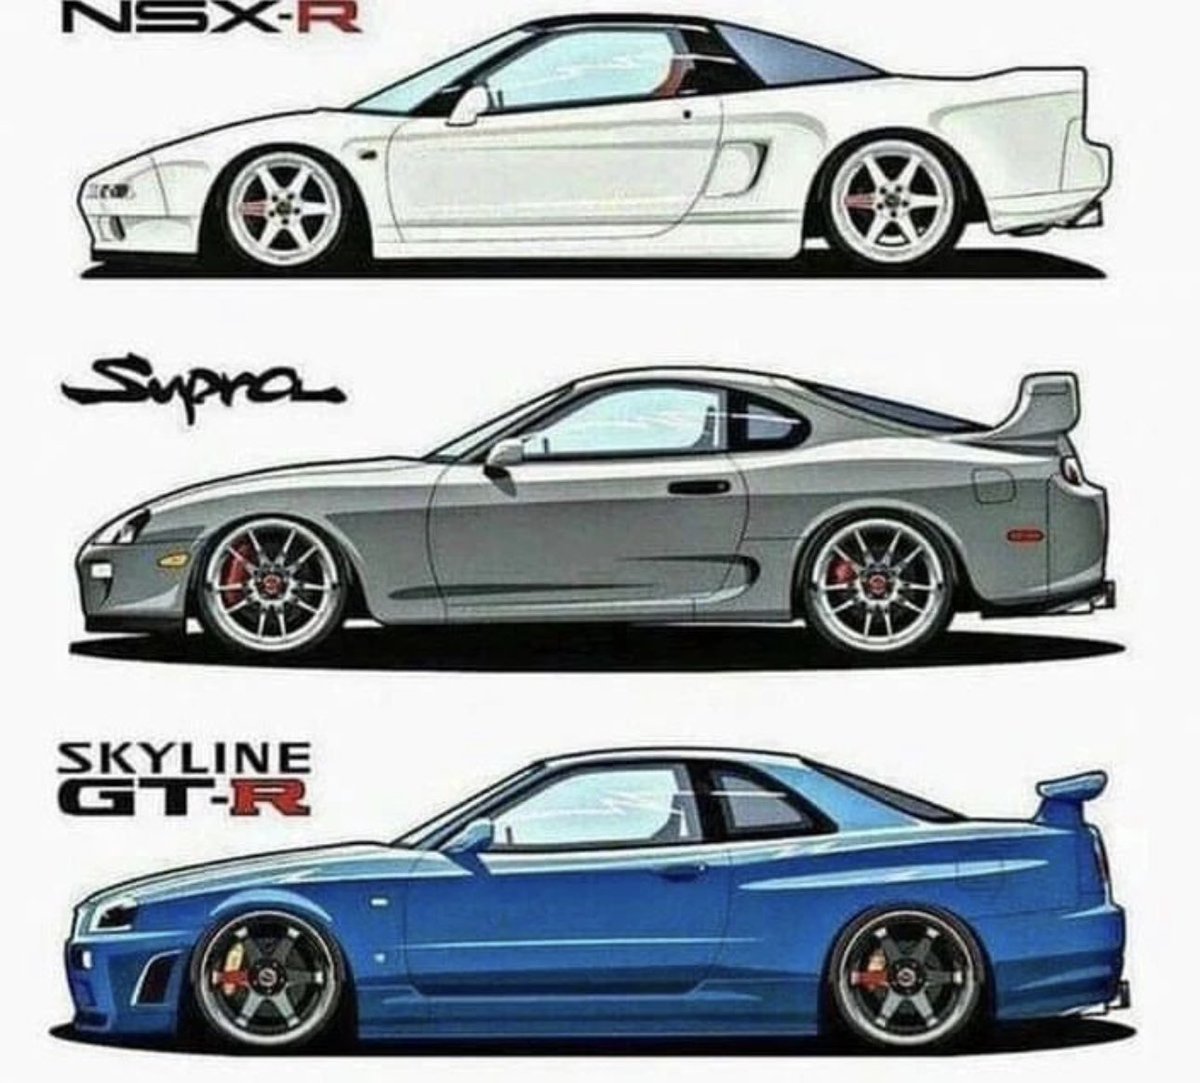 What’s your favorite? 😎🔥